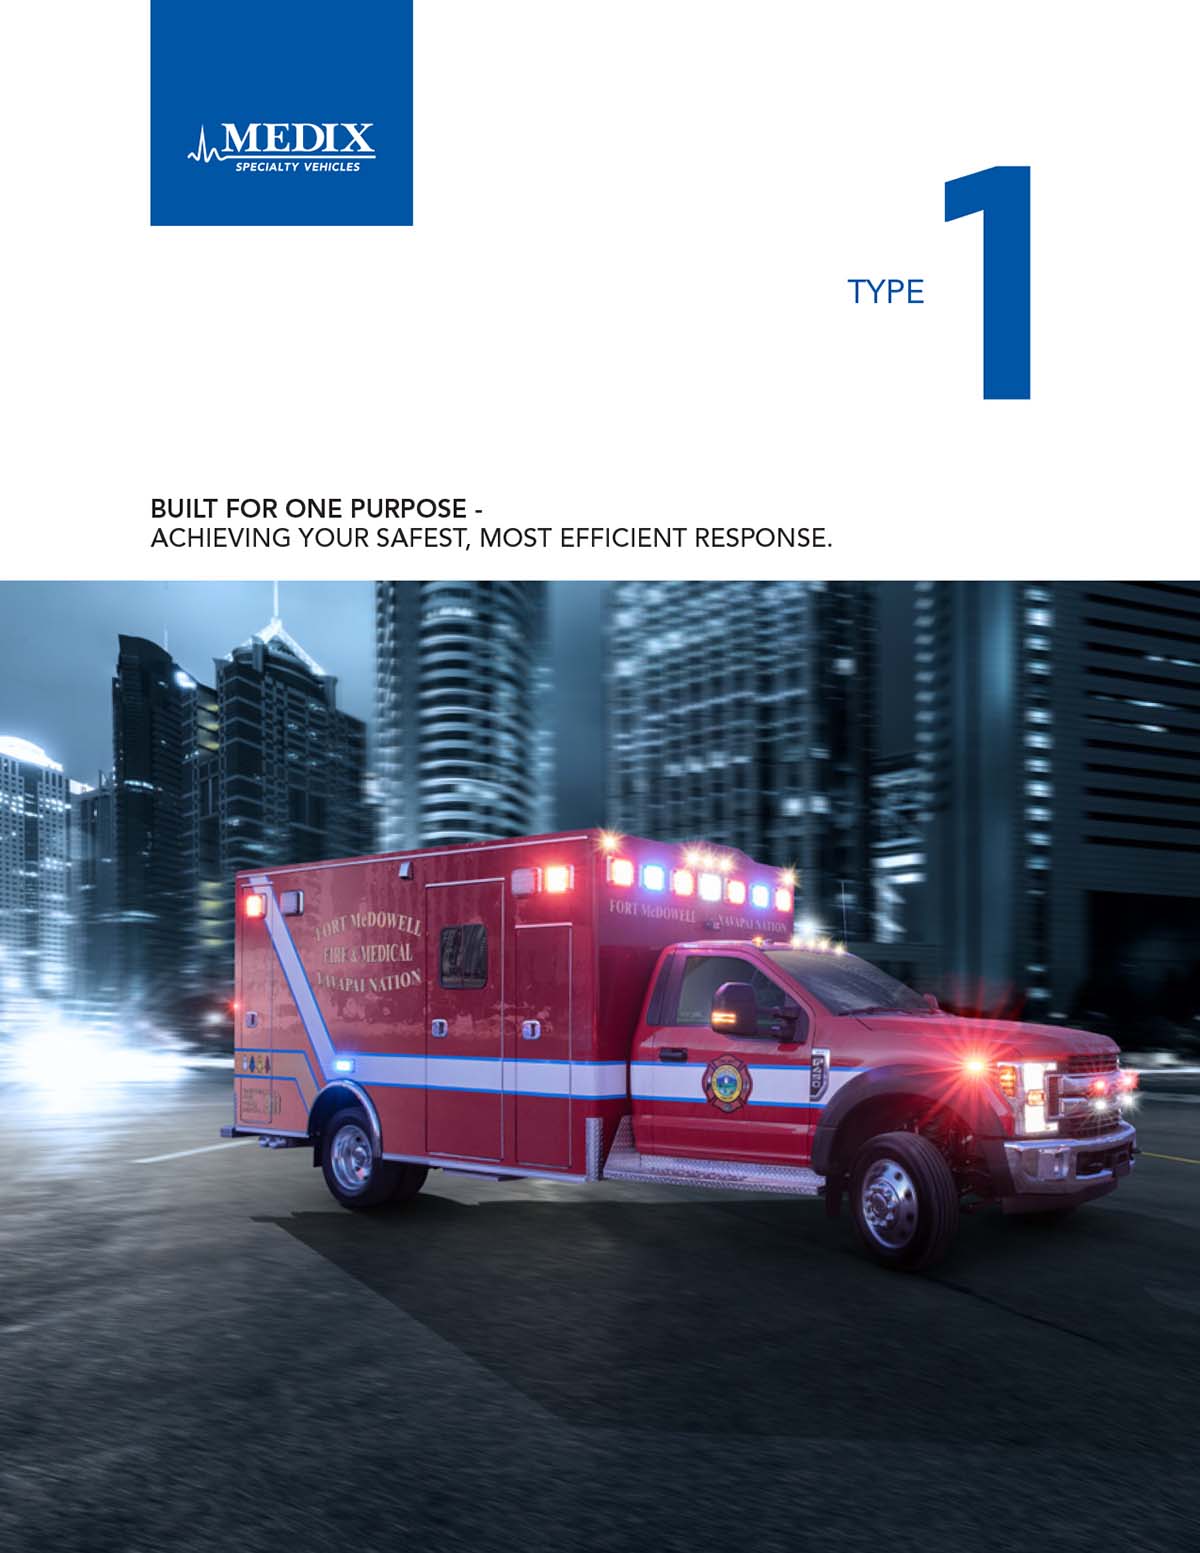 A red Medix Type 1 ambulance with all of the lights on or flashing while it turns a corner driving in a city with large buildings all around